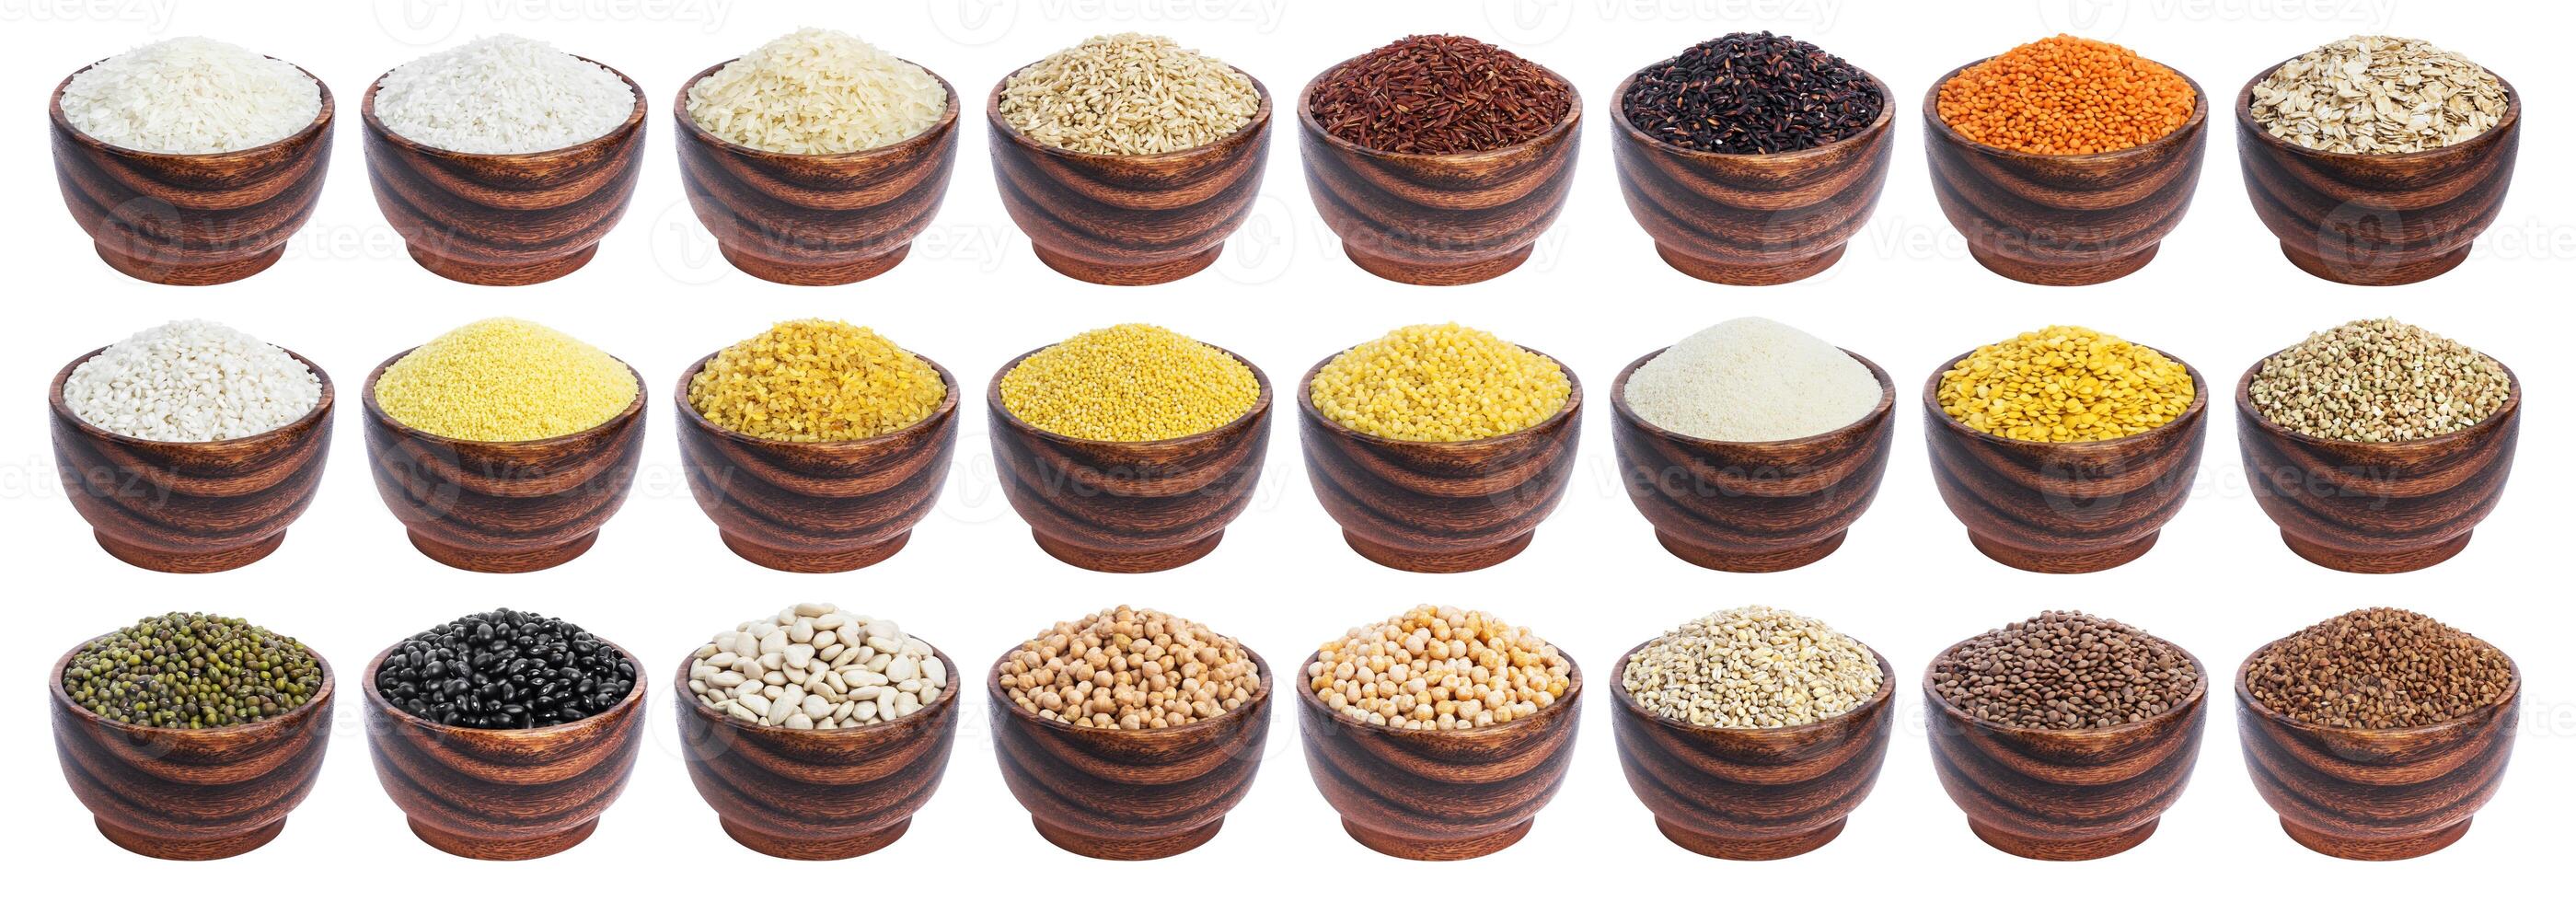 Different cereals, grains and flakes isolated on white background with clipping path photo